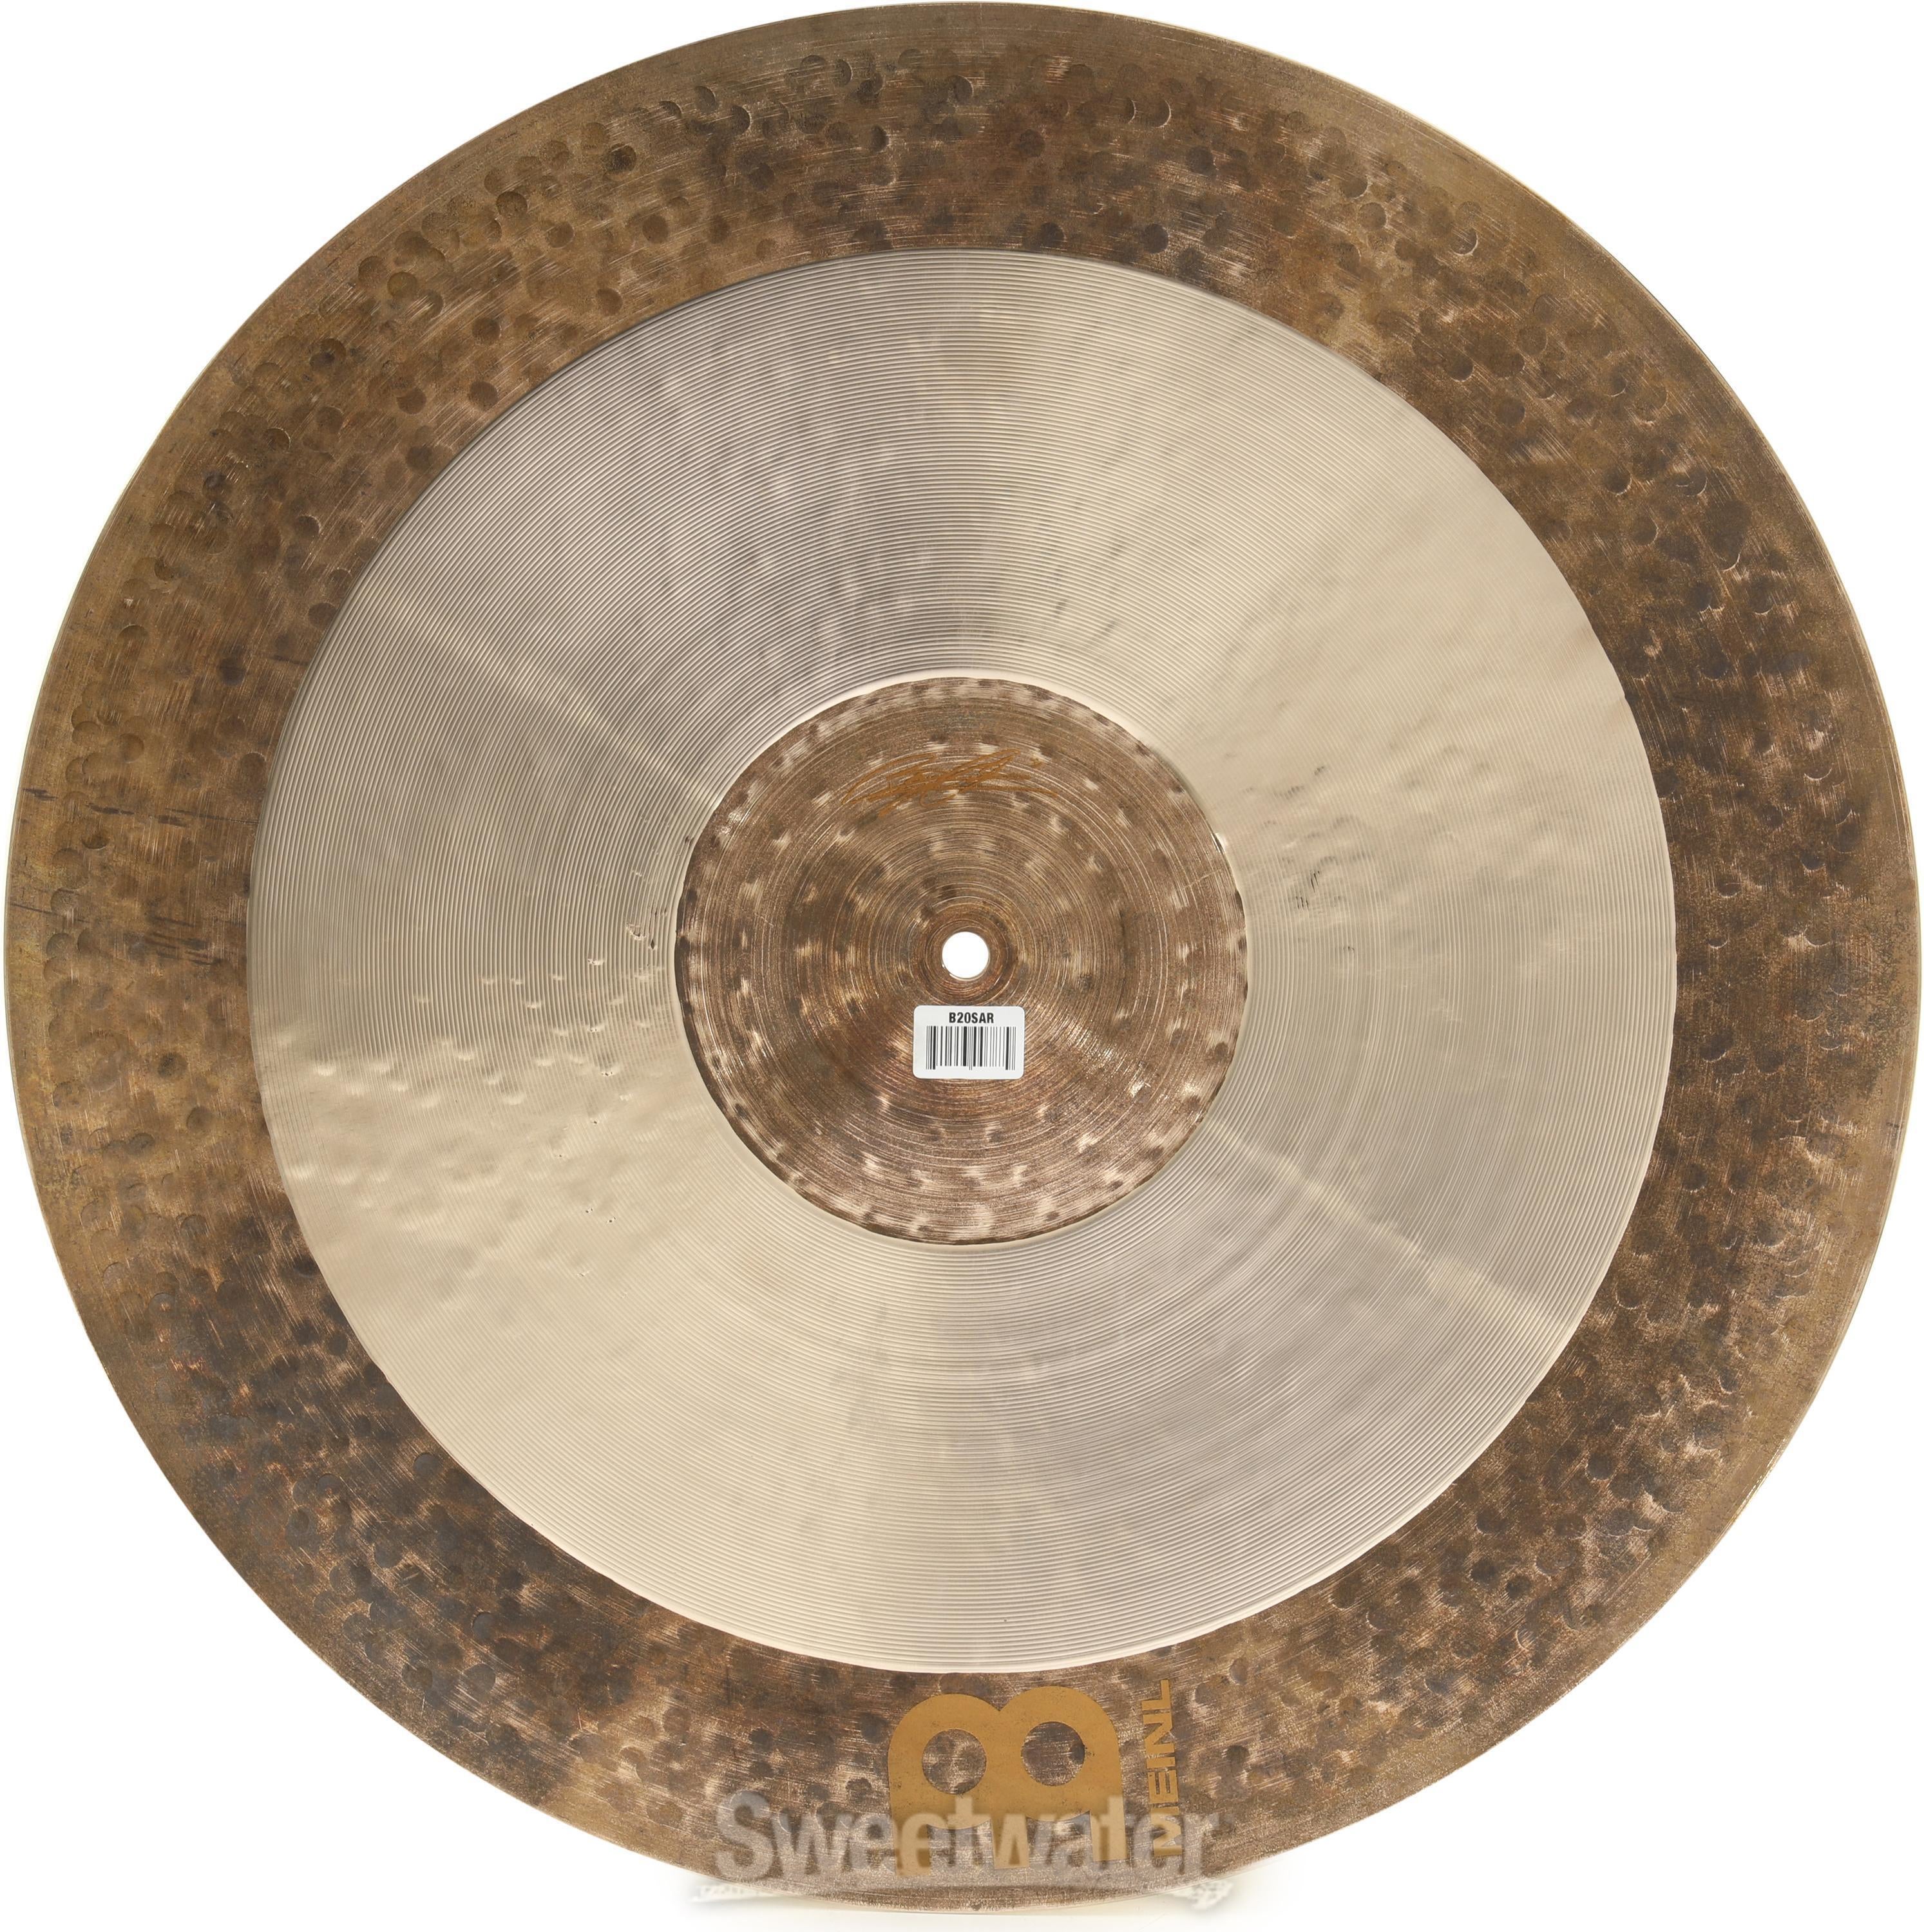 Meinl Cymbals 20 inch Byzance Vintage Sand Ride Cymbal